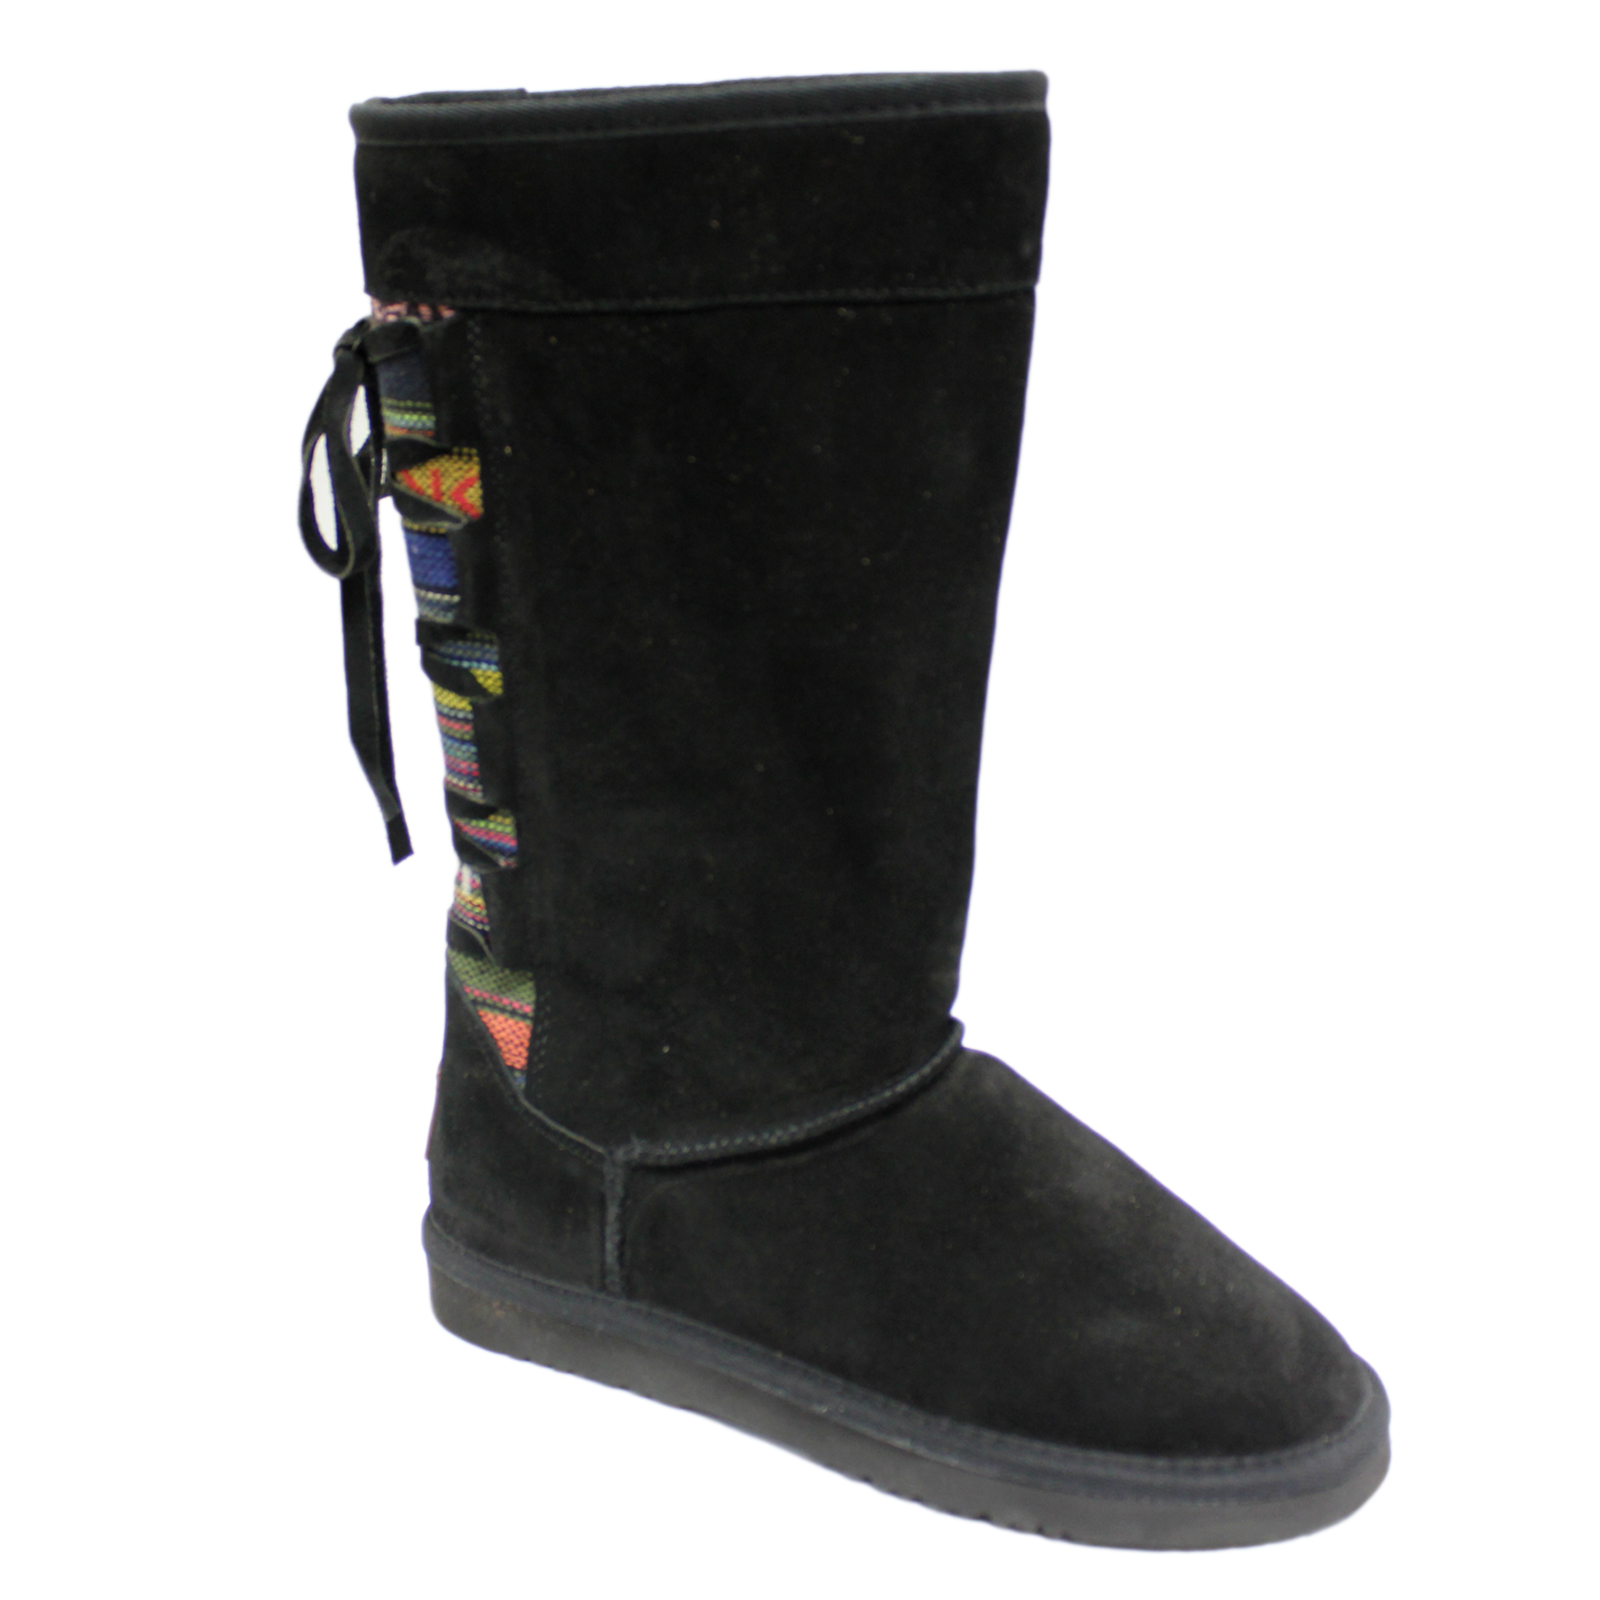 Women's lookout 12" native themed back black boot